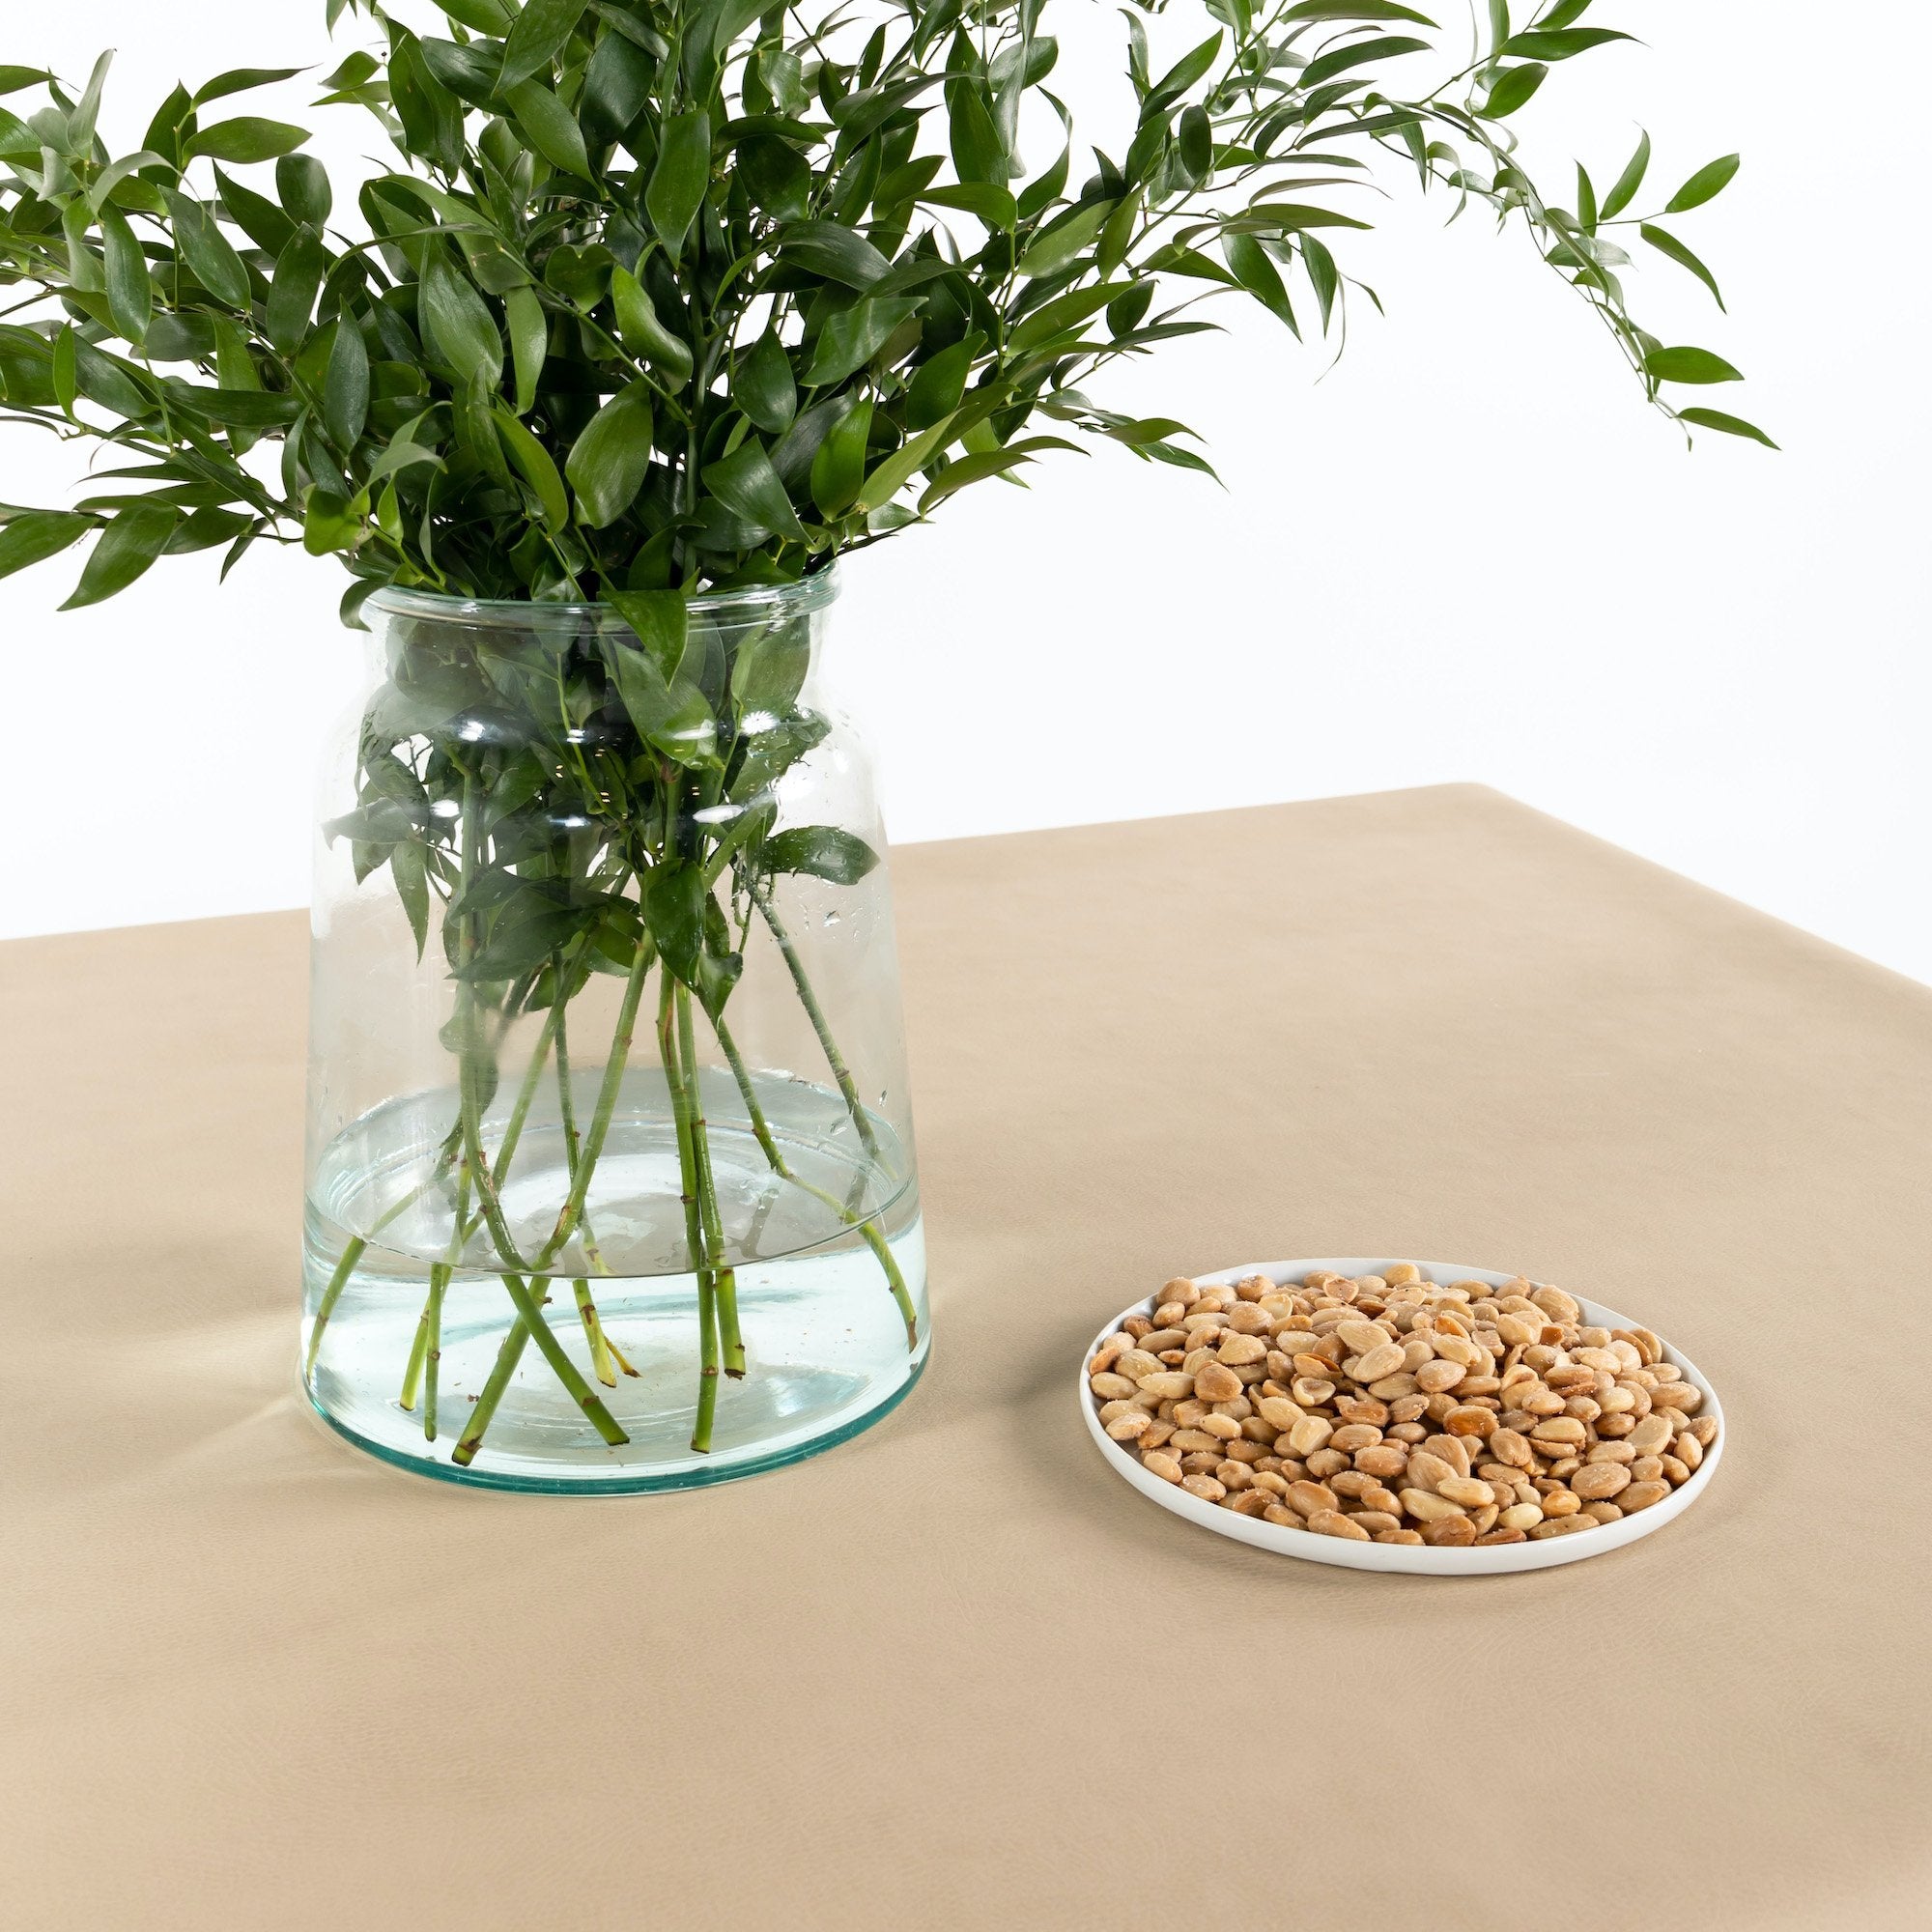 Millet@Overhead Millet Tablecloth on dining table